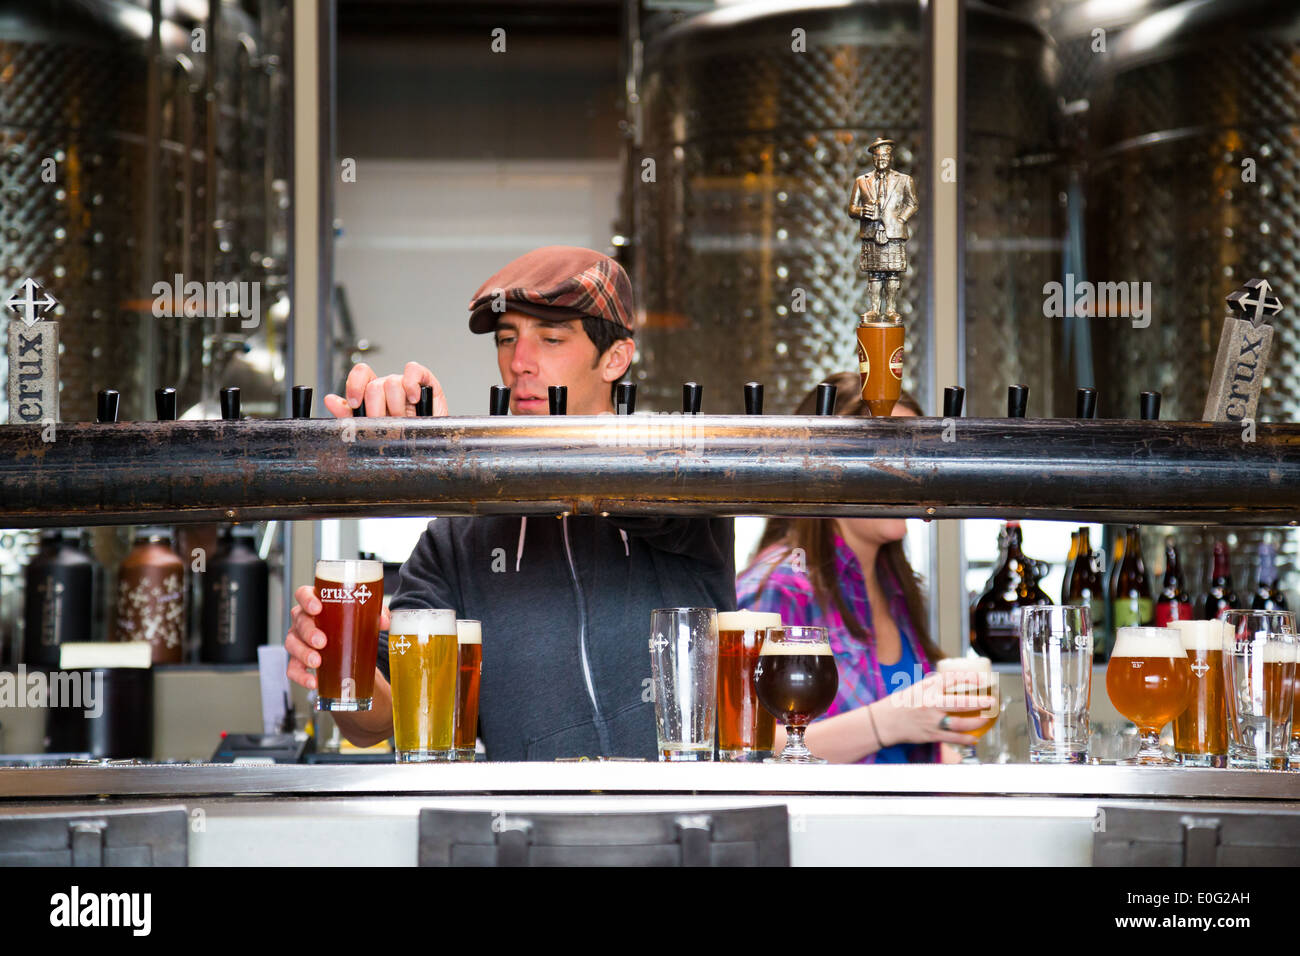 Bend, OR, USA - January 12, 2014: Bartender pouring drinks at Crux Fermentation Project in Bend, Oregon. Stock Photo